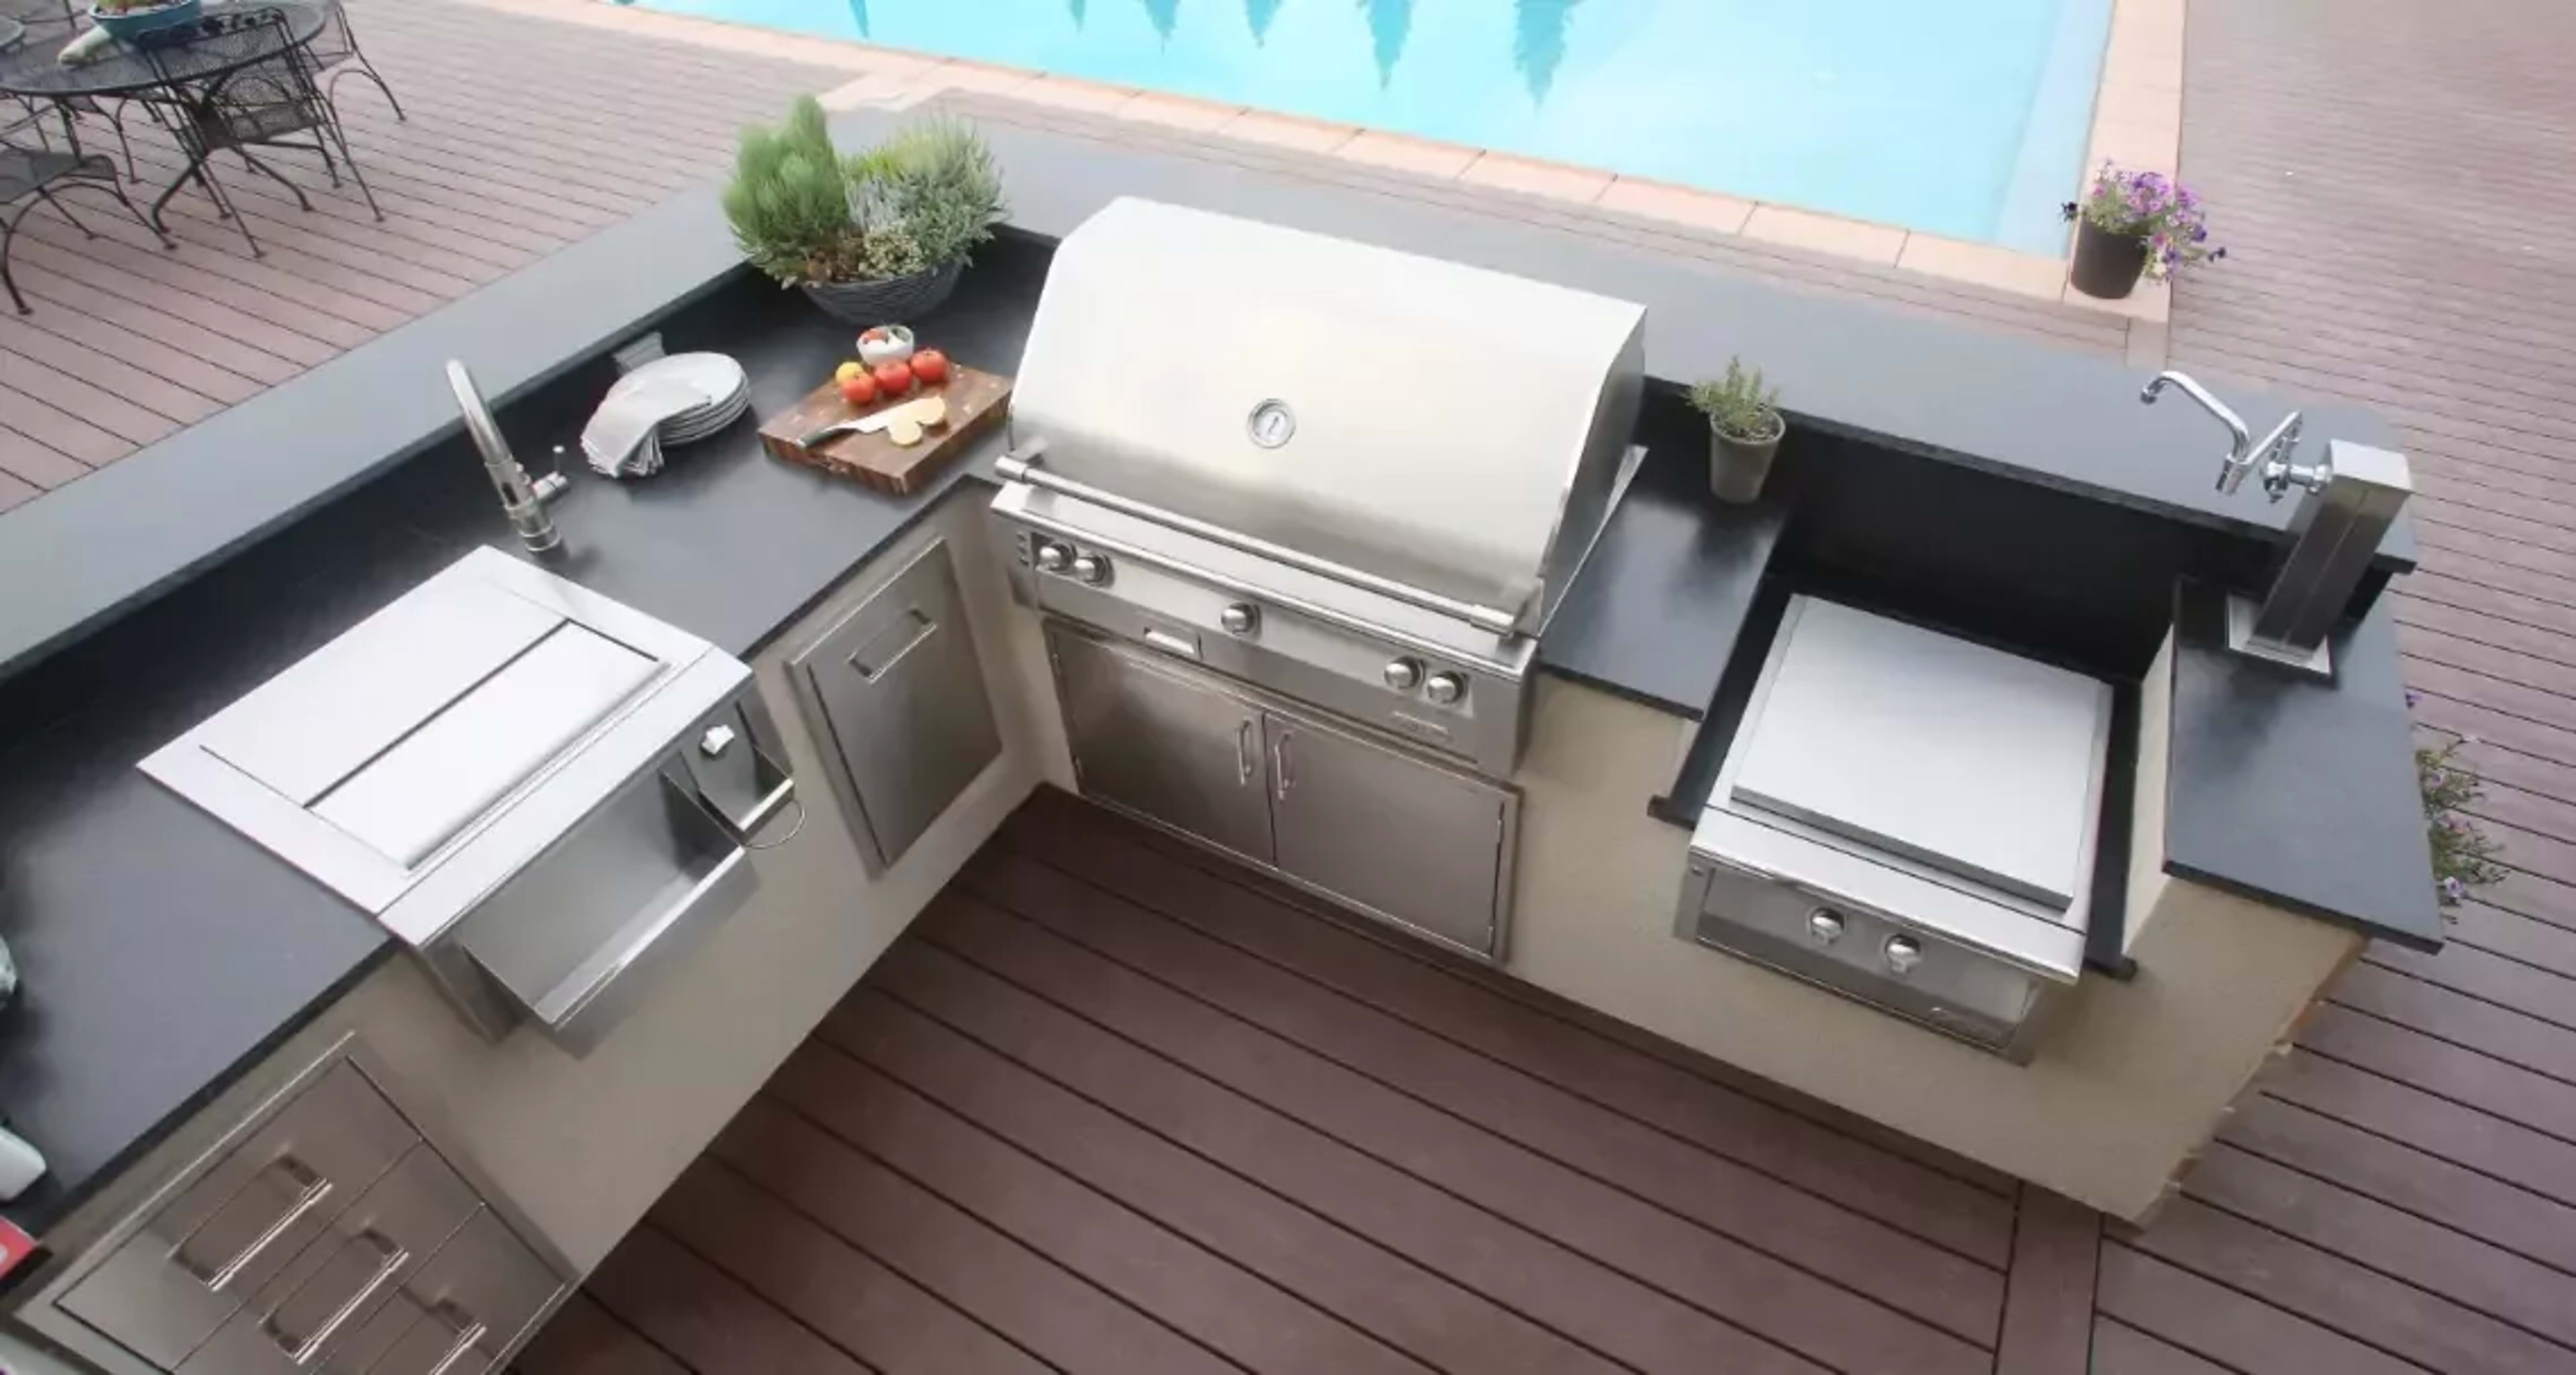 <p>Legacy and craftsmanship meet high-tech, modern sensibilities in Alfresco grills and luxury outdoor kitchen products, which incorporate the same manufacturing quality used in restaurant equipment to make chef-worthy outdoor appliances accessible. </p>